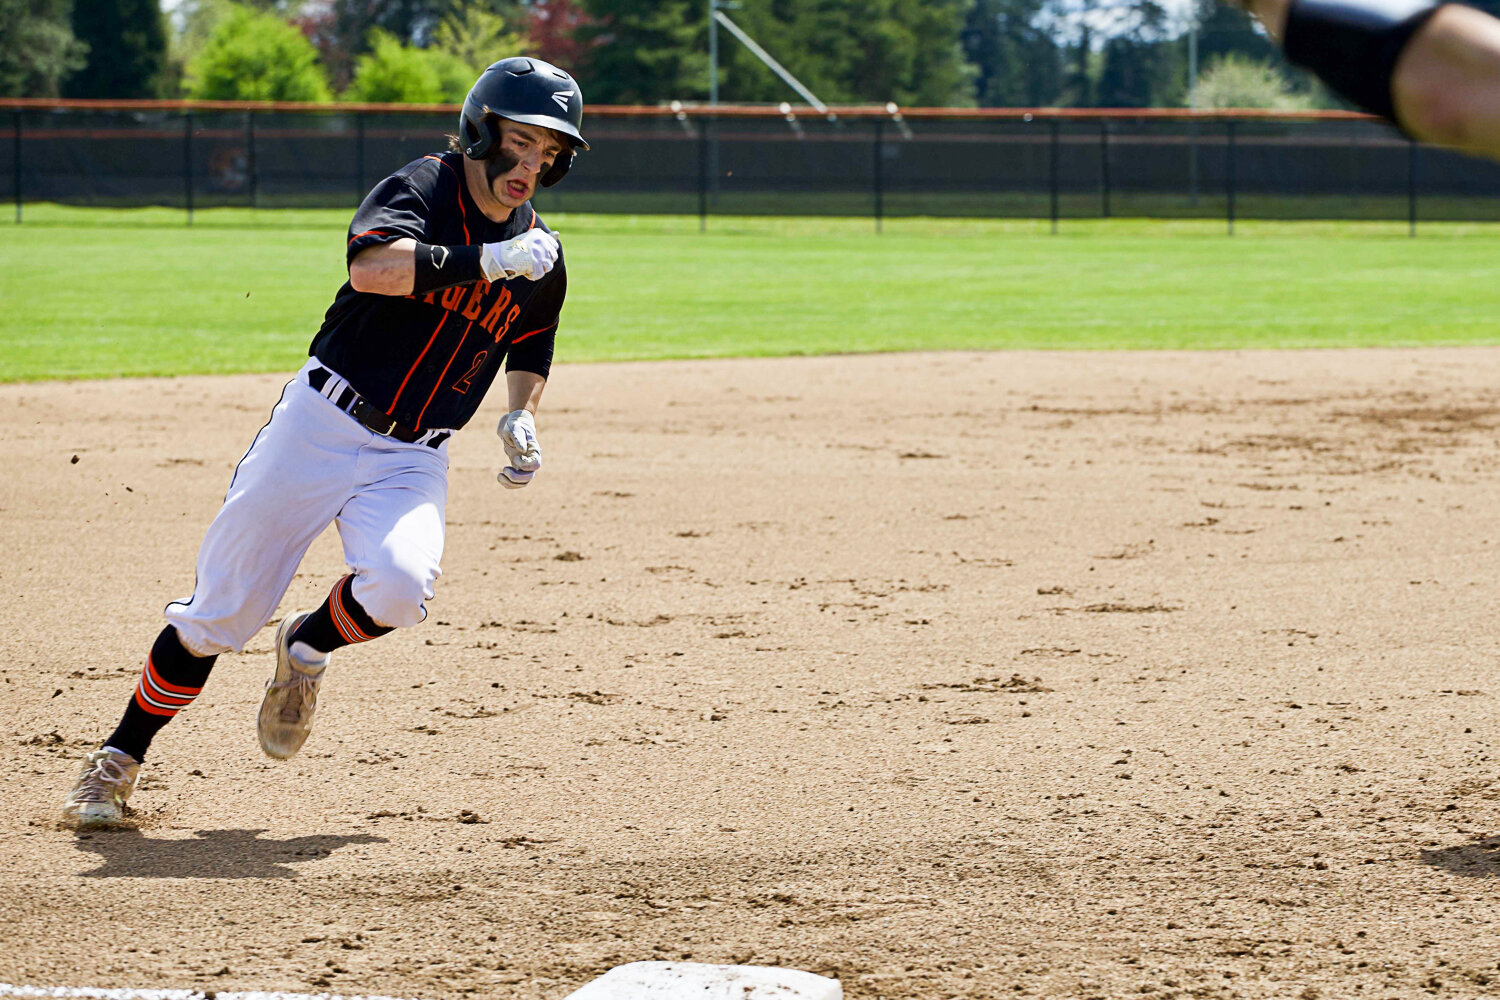 Napavine's Austin Chapman rounds third to score a run against Forks in the 2B District 4 consolation quarterfinals May 9 in Napavine.